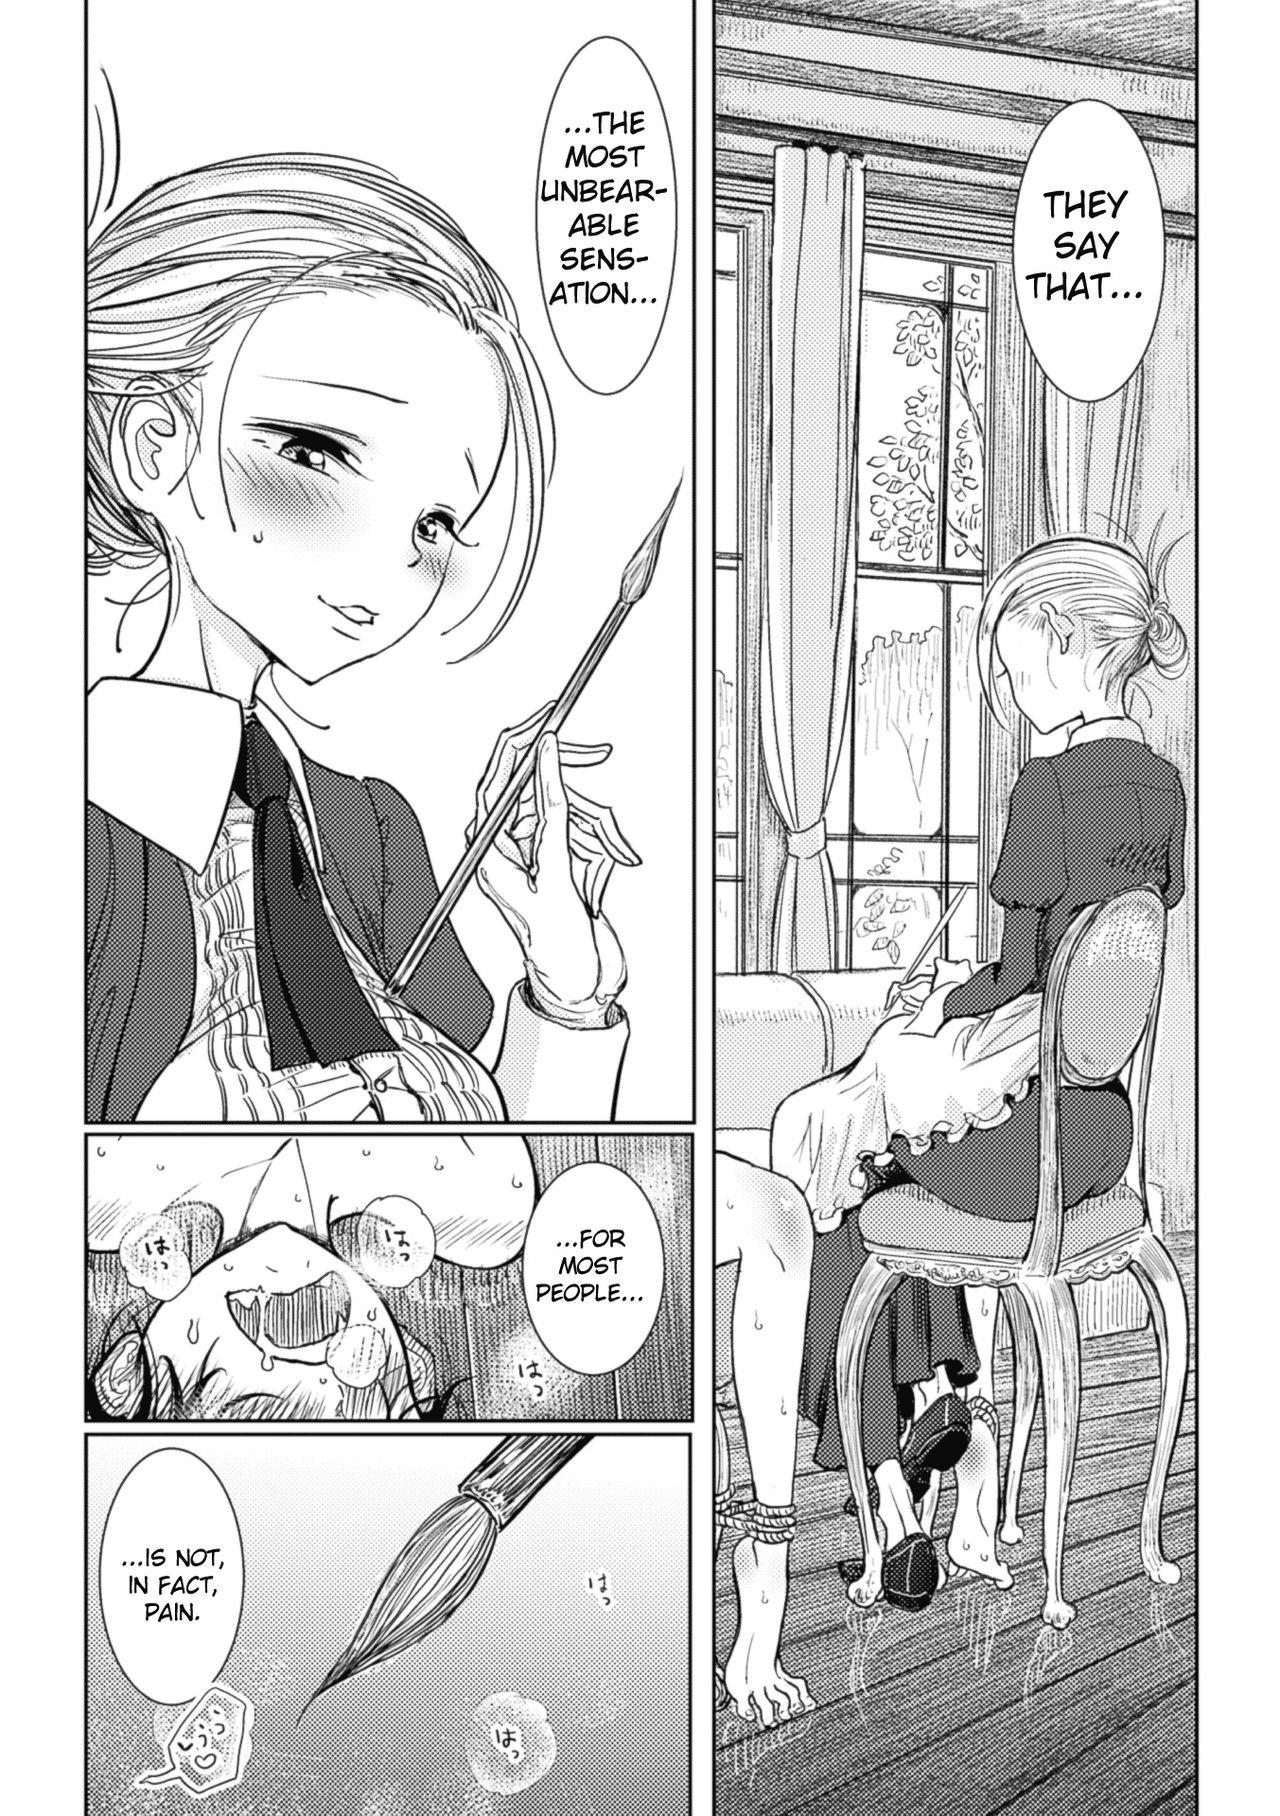 Puba Hatsujou to Choukyou no Aida | During Mating and Training Ch. 2 Load - Page 3